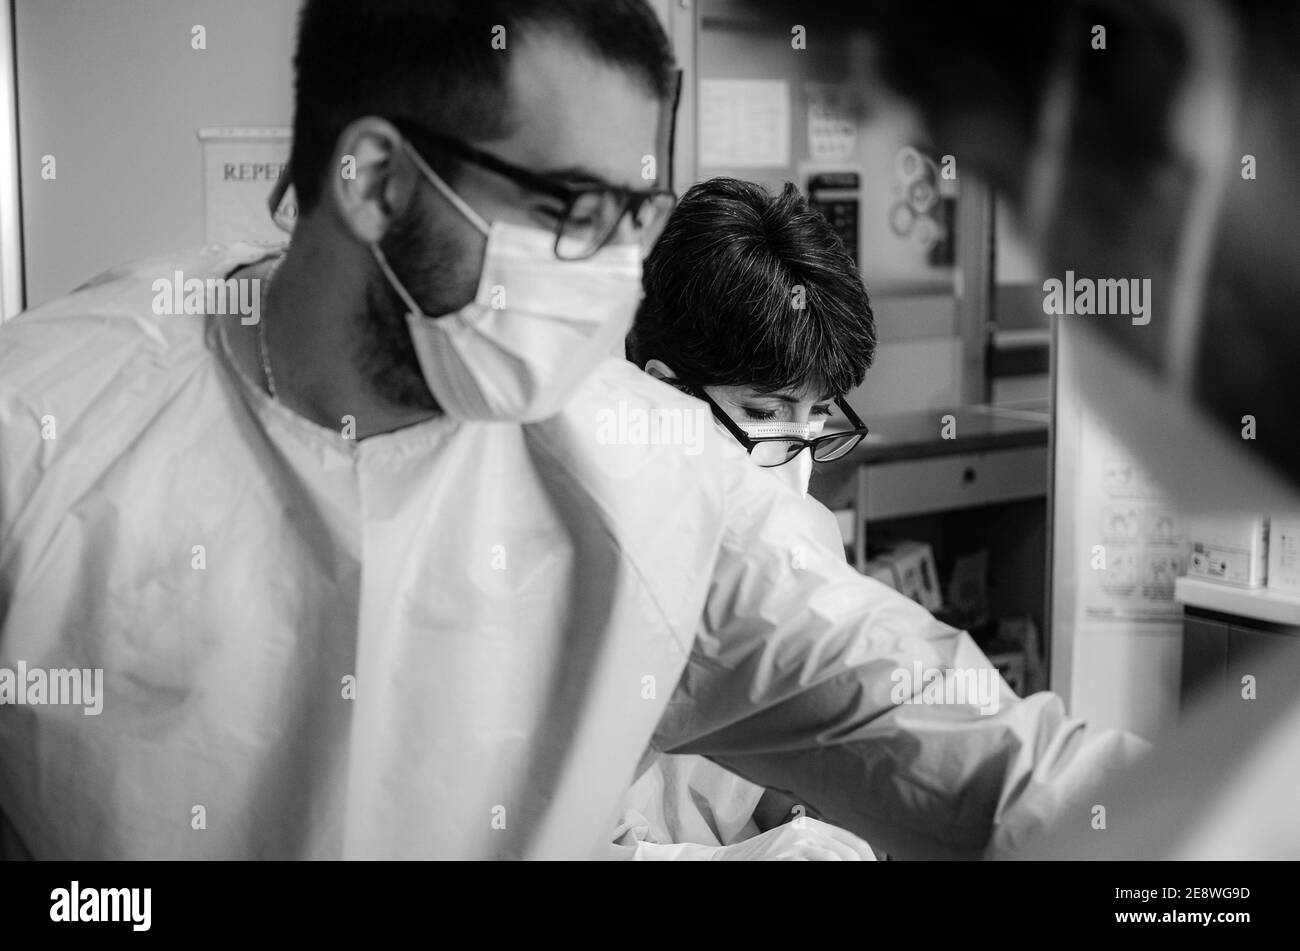 Cremona, Lombardy, Italy - Jan 29th 2021 Dr Aiolo and equipe preparing doses of Pfizer Biontech covid-19 vaccine for vaccination Stock Photo